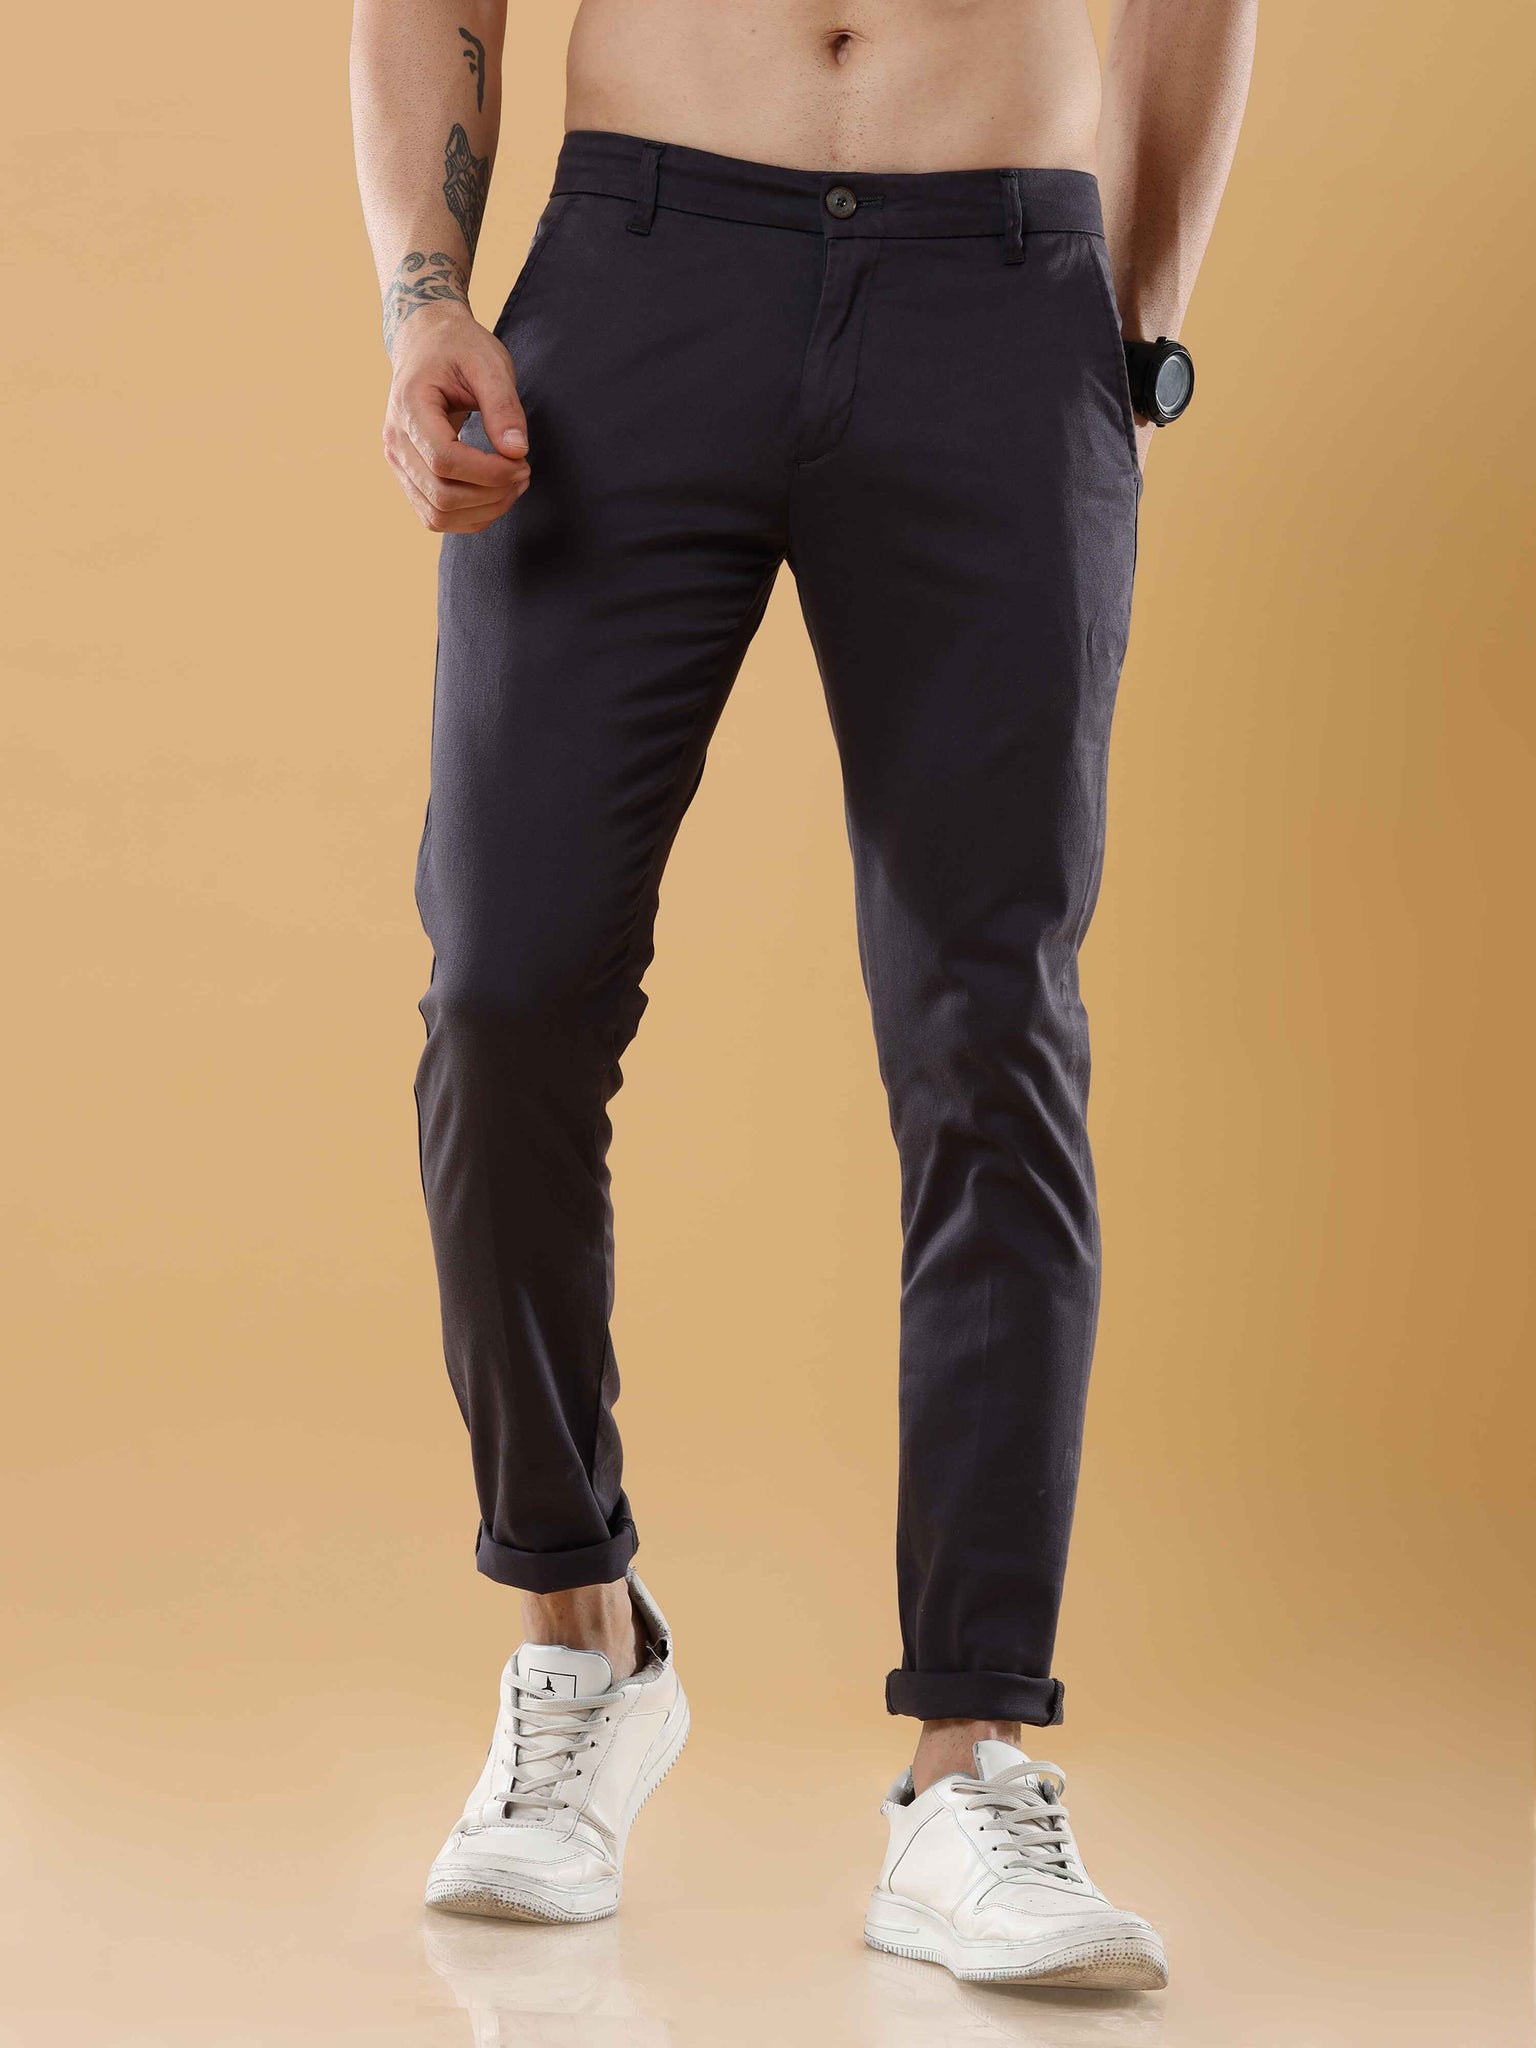 Carbon Black Feather Feel Chinos Trousers